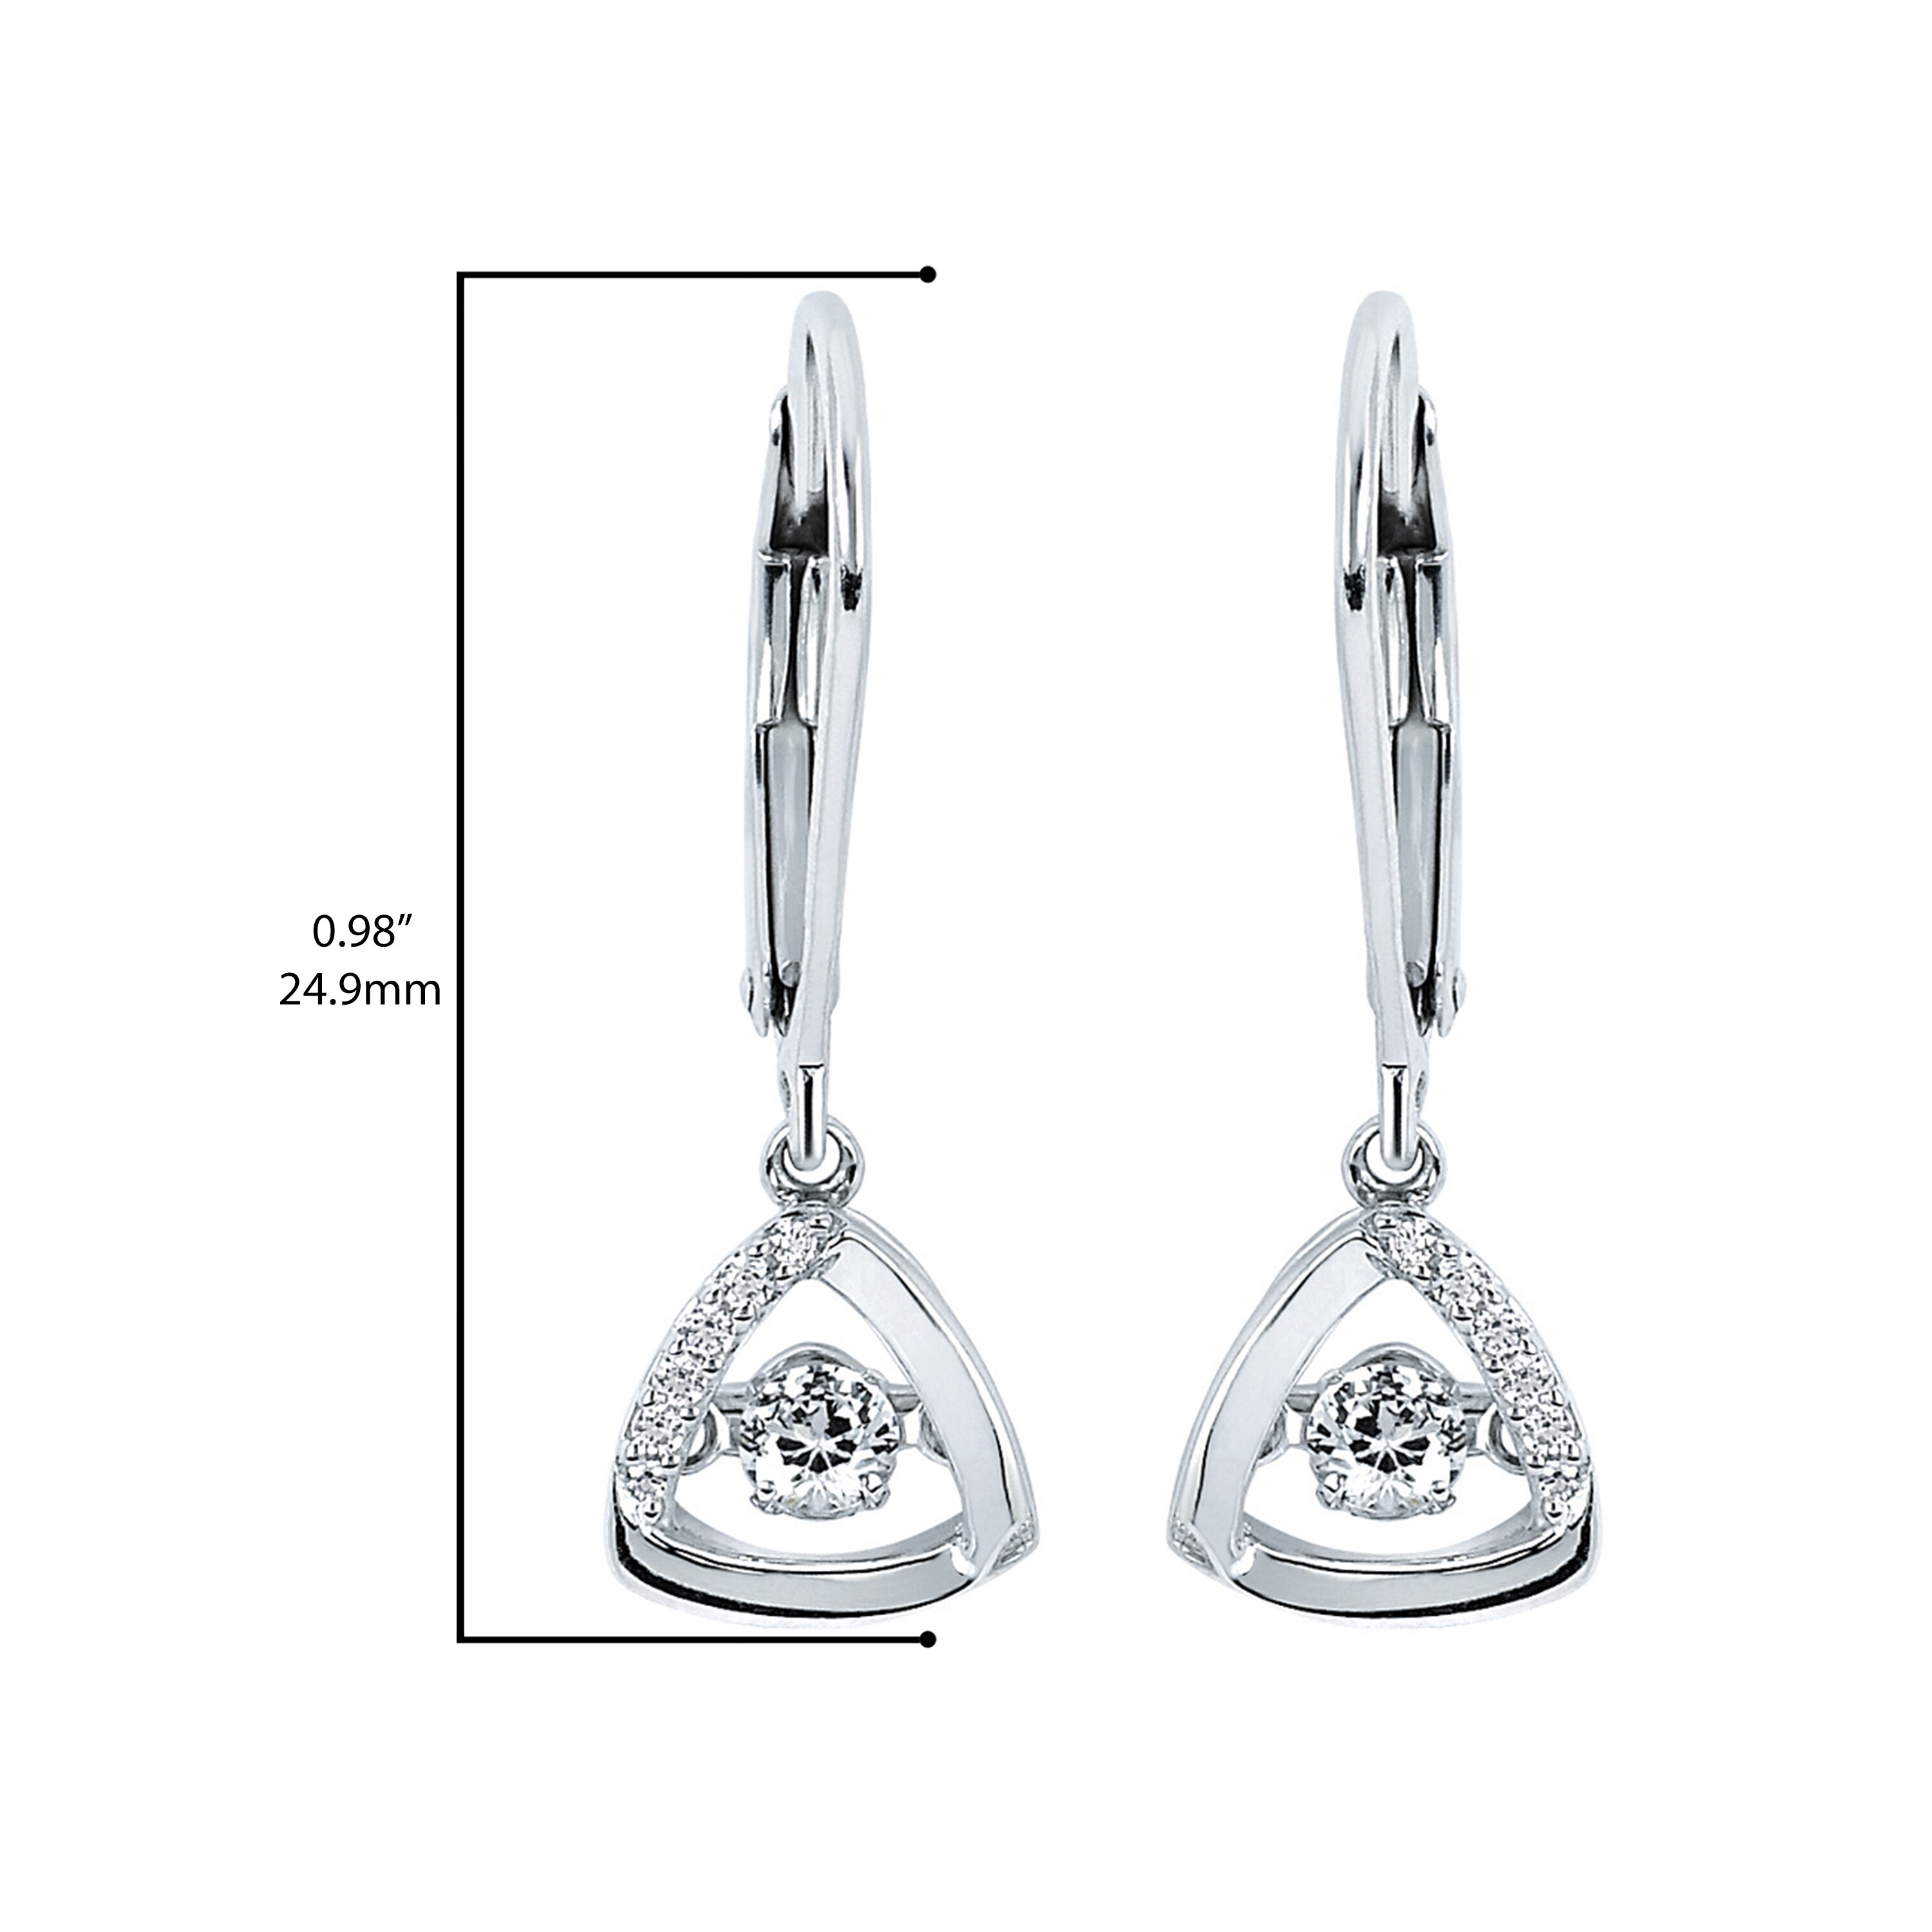 1/10 cttw., H-I Color, I1-I2 Clarity 925 Sterling Silver Dancing Diamond Dainty Heart Earrings 